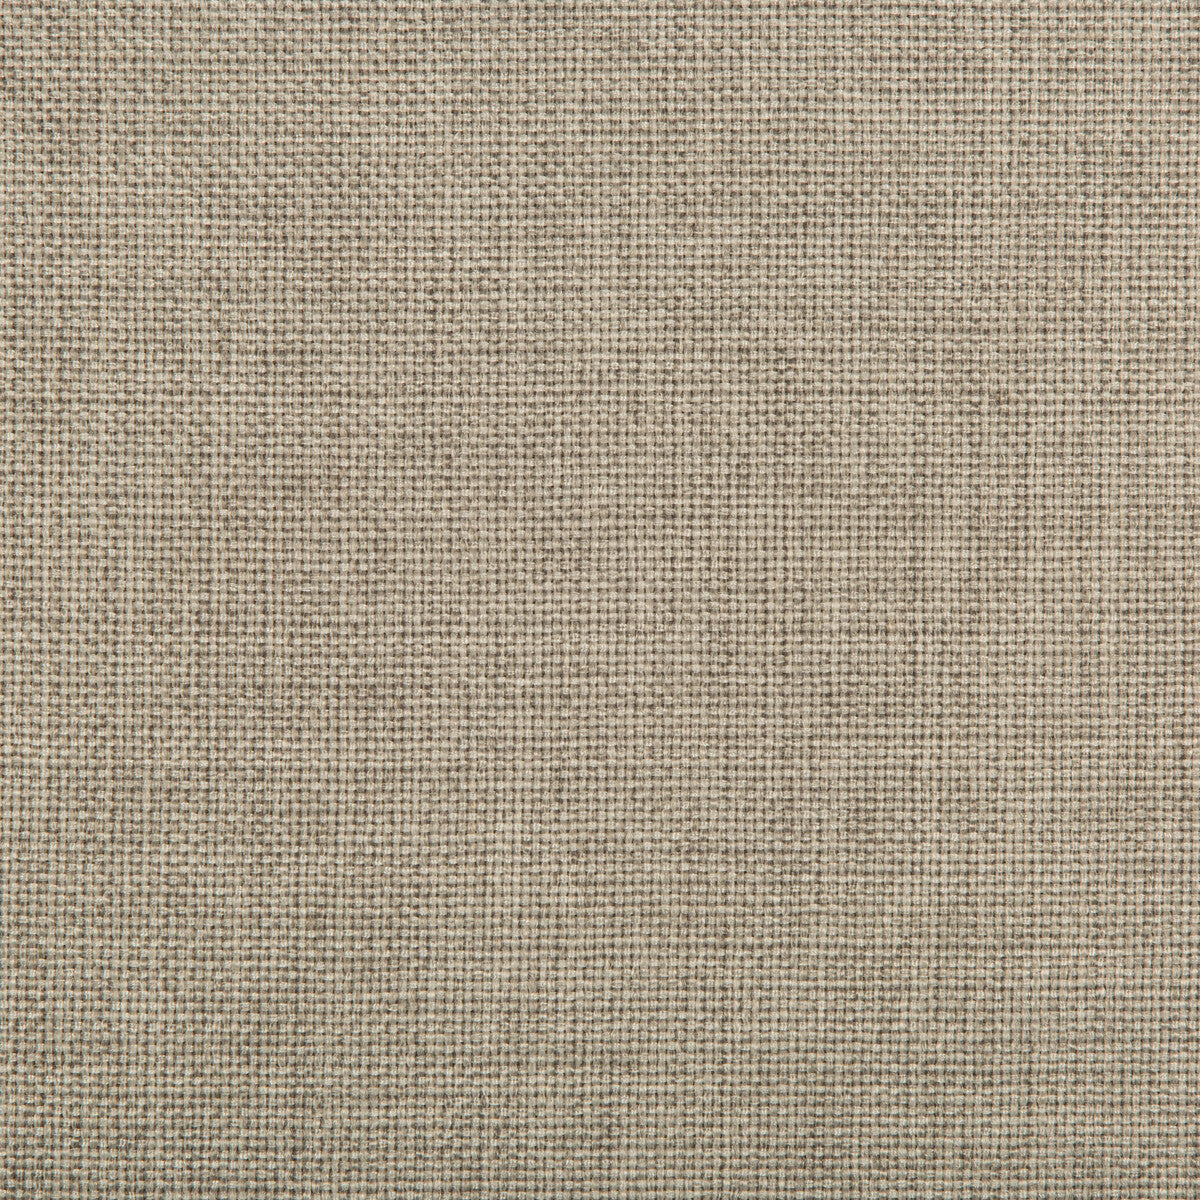 Kravet Contract fabric in 4637-21 color - pattern 4637.21.0 - by Kravet Contract